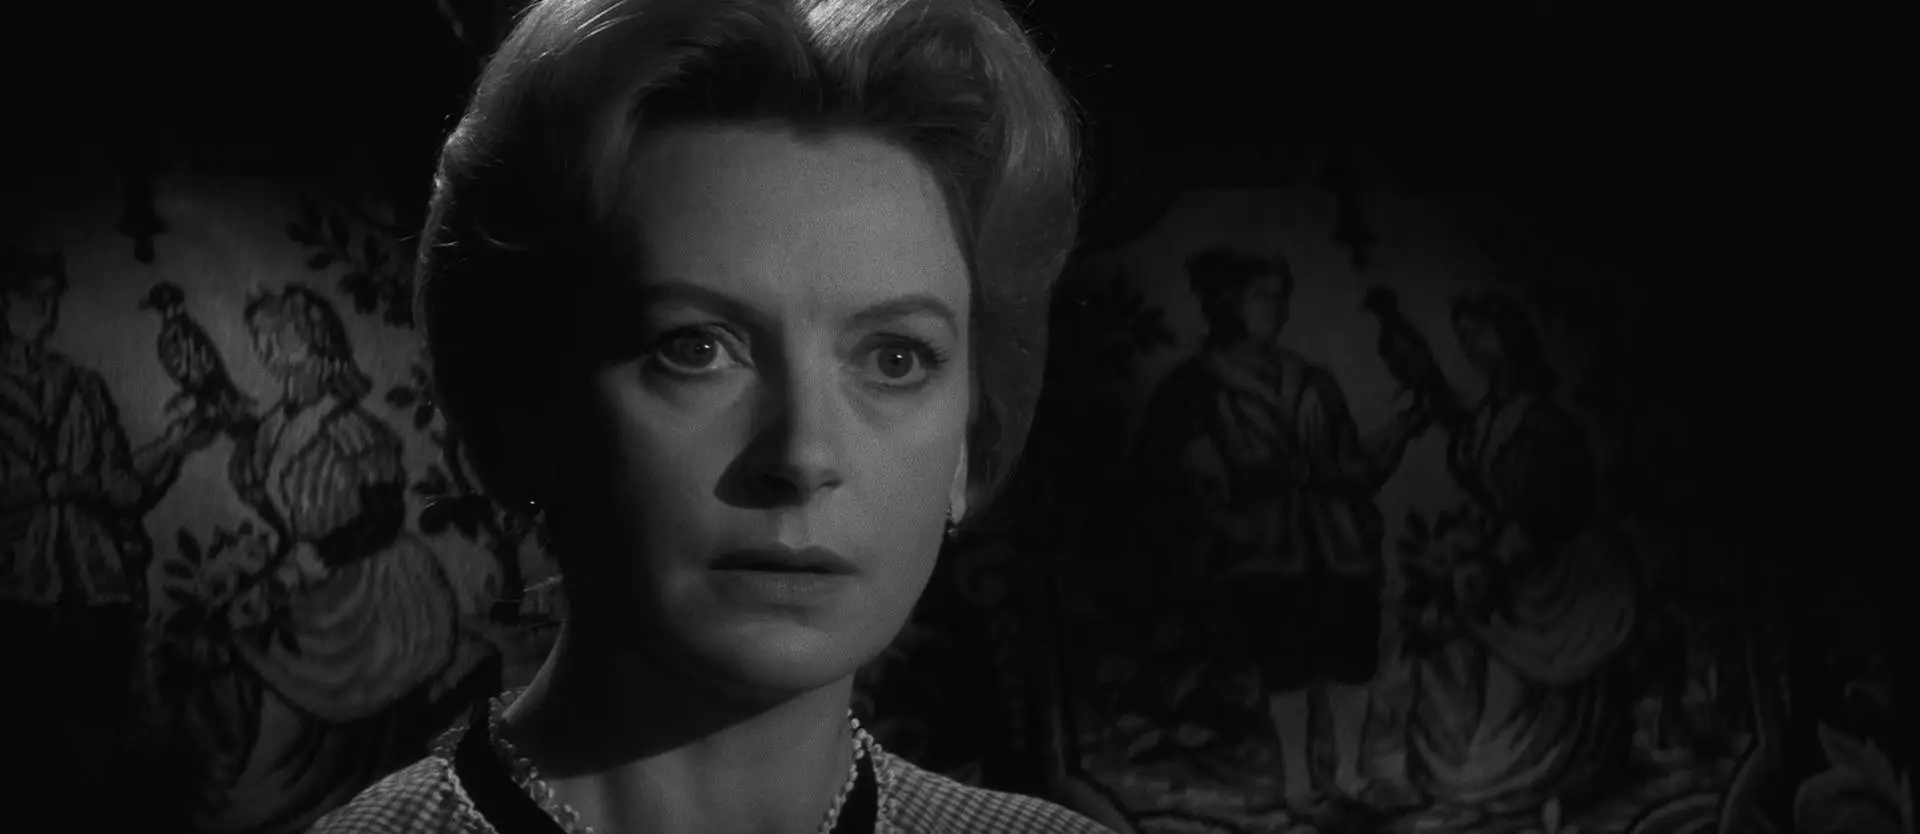 The Innocents (1961) [Remastered]